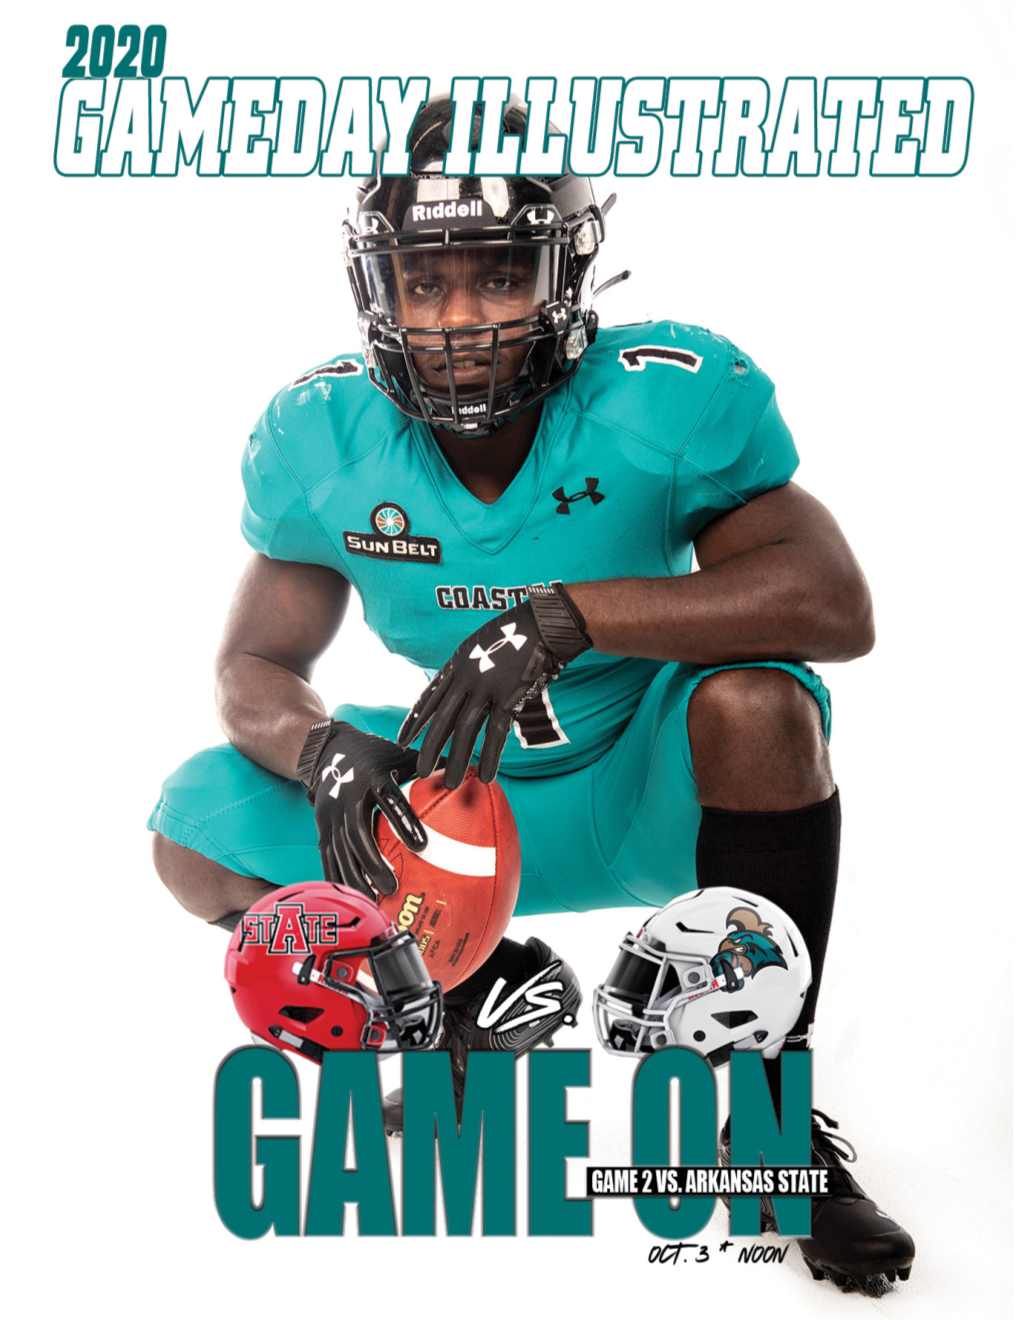 3 12 21 26 59 GAMEDAY HEAD COACH 2020 INFORMATION for ABOUT INFORMATION JAMEY CHADWELL CHANTICLEERS TONIGHT’S GAME COASTAL CAROLINA Gameday Information